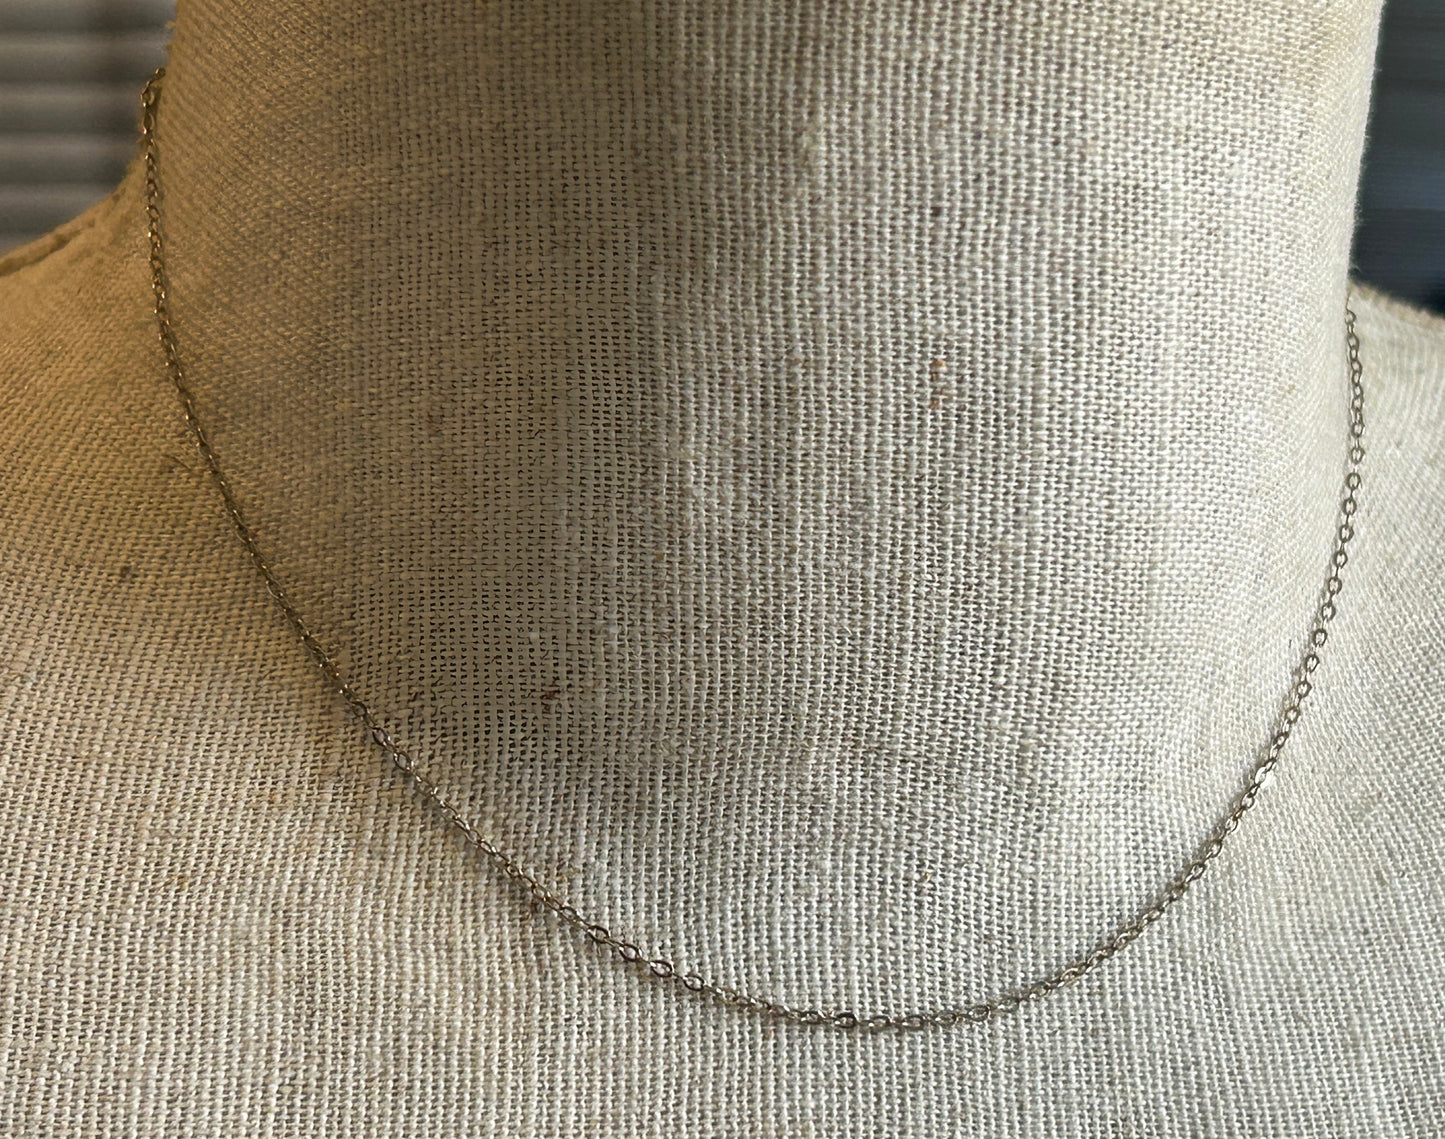 12k White Gold Filled Thin Chain Necklace 15" Long